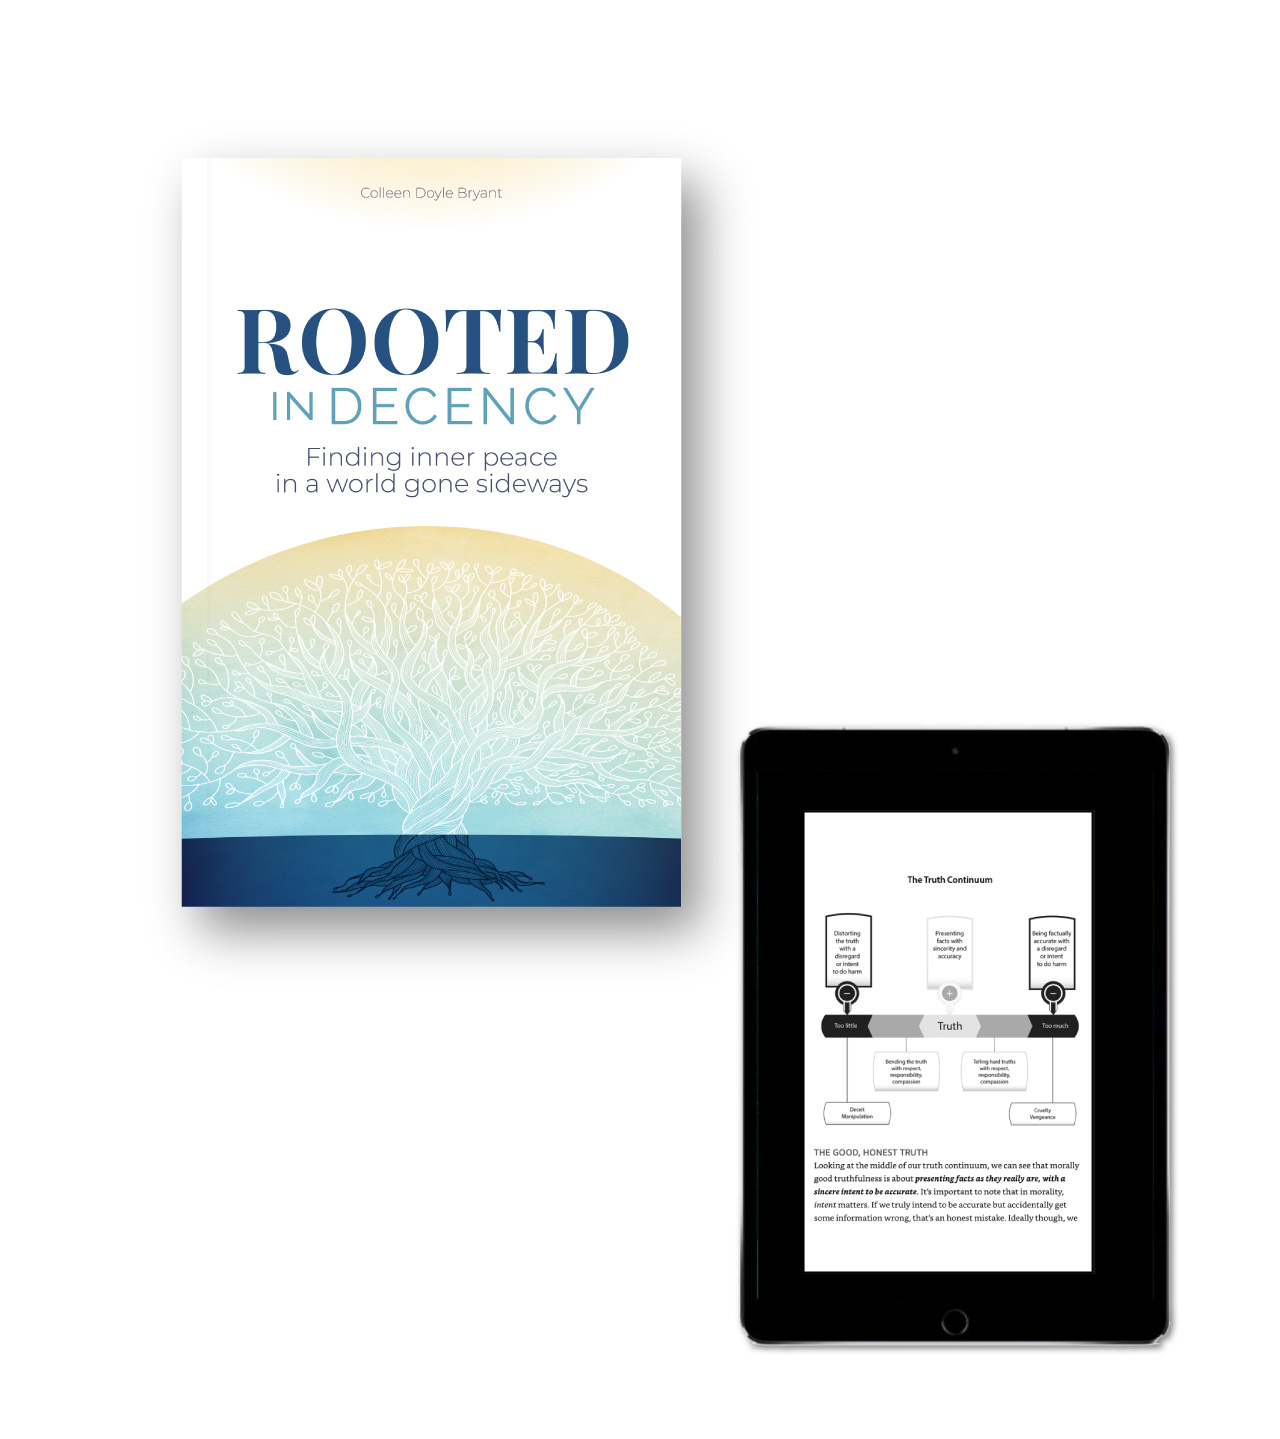 Rooted in Decency Book from Colleen Doyle Bryant